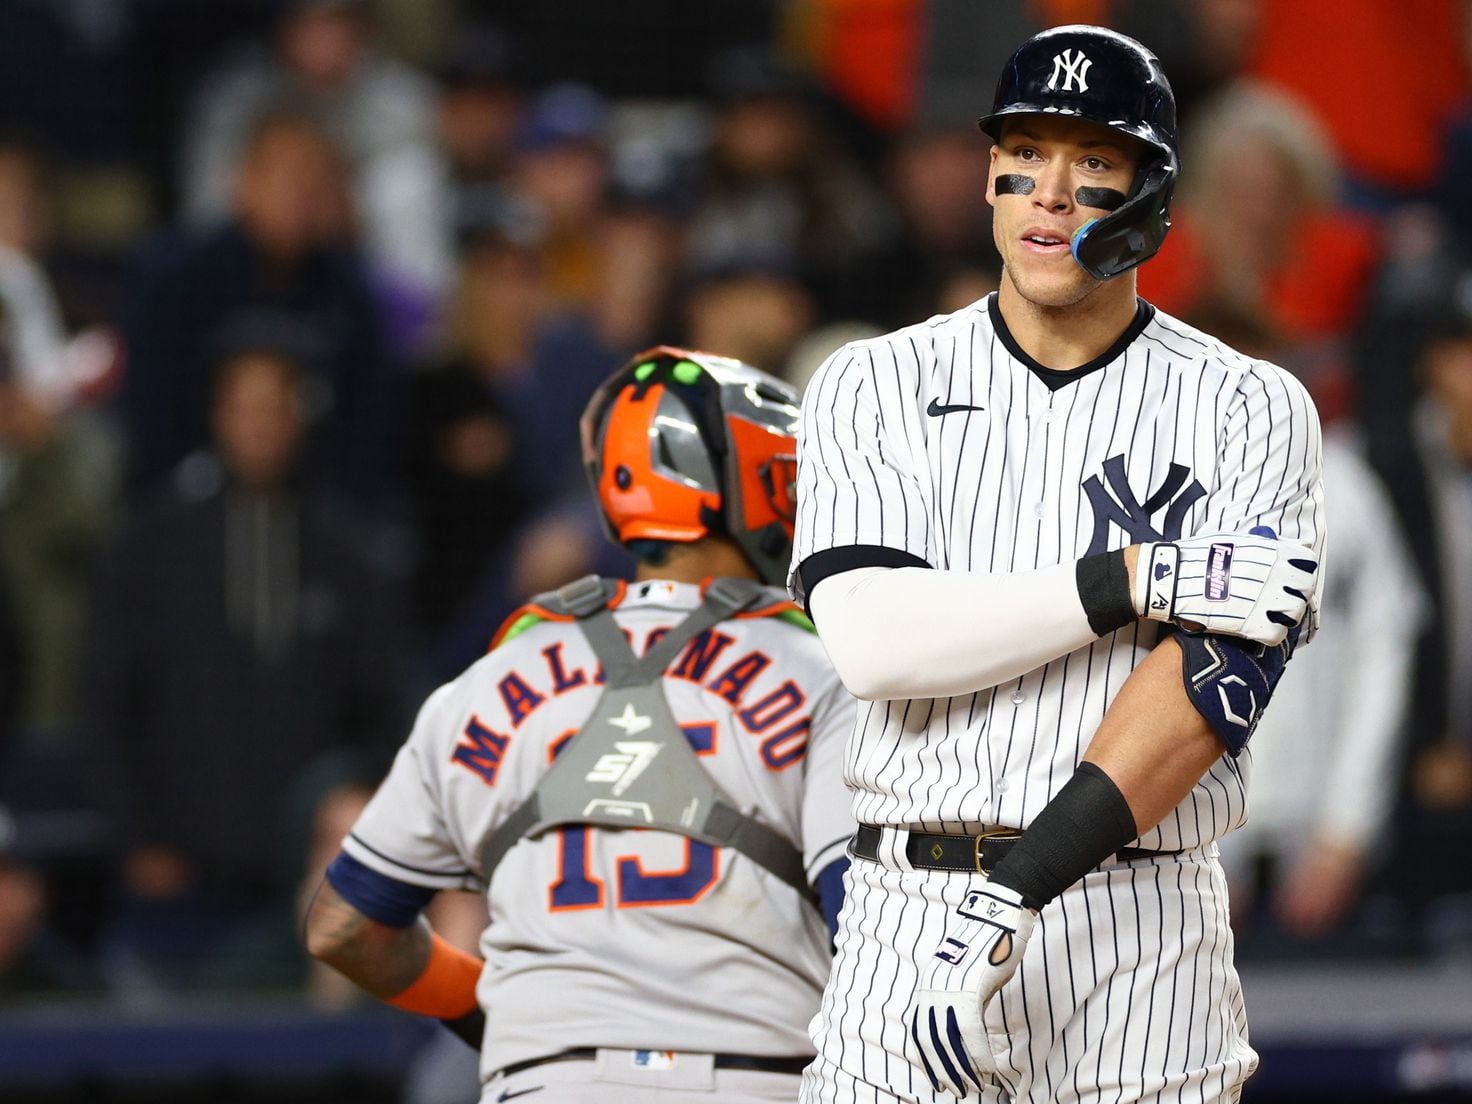 Will Yankees fans' boos play into Aaron Judge free agency?